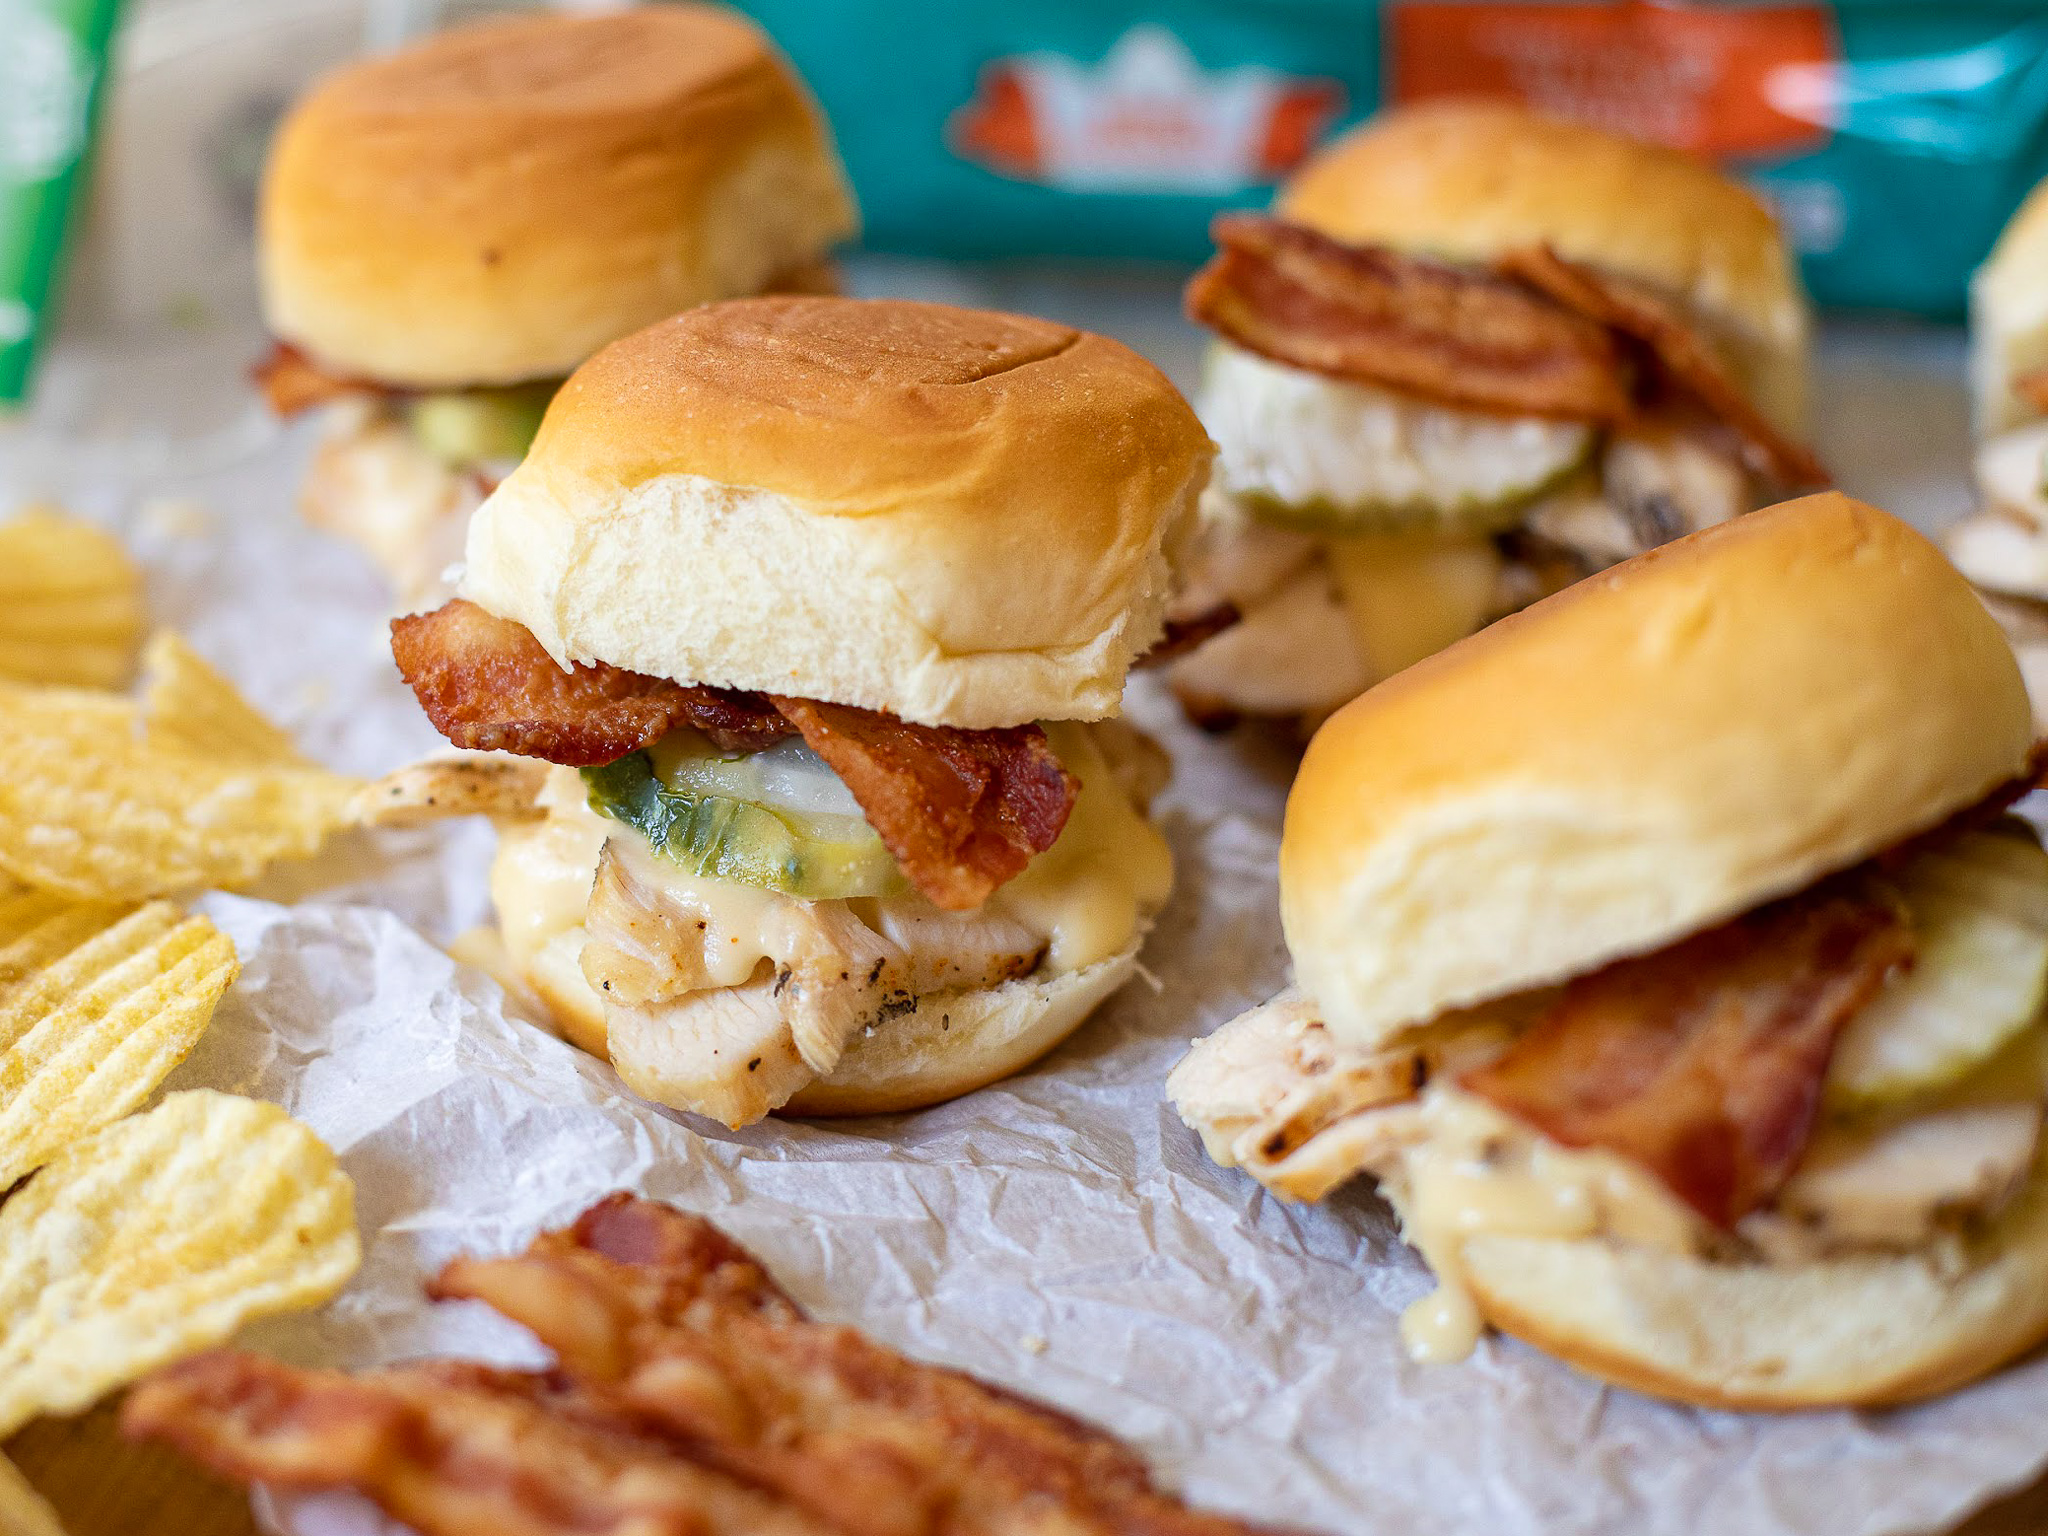 Add These Beer Cheese & Bacon Topped Chicken Sliders To Your Labor Day Menu on I Heart Publix 2